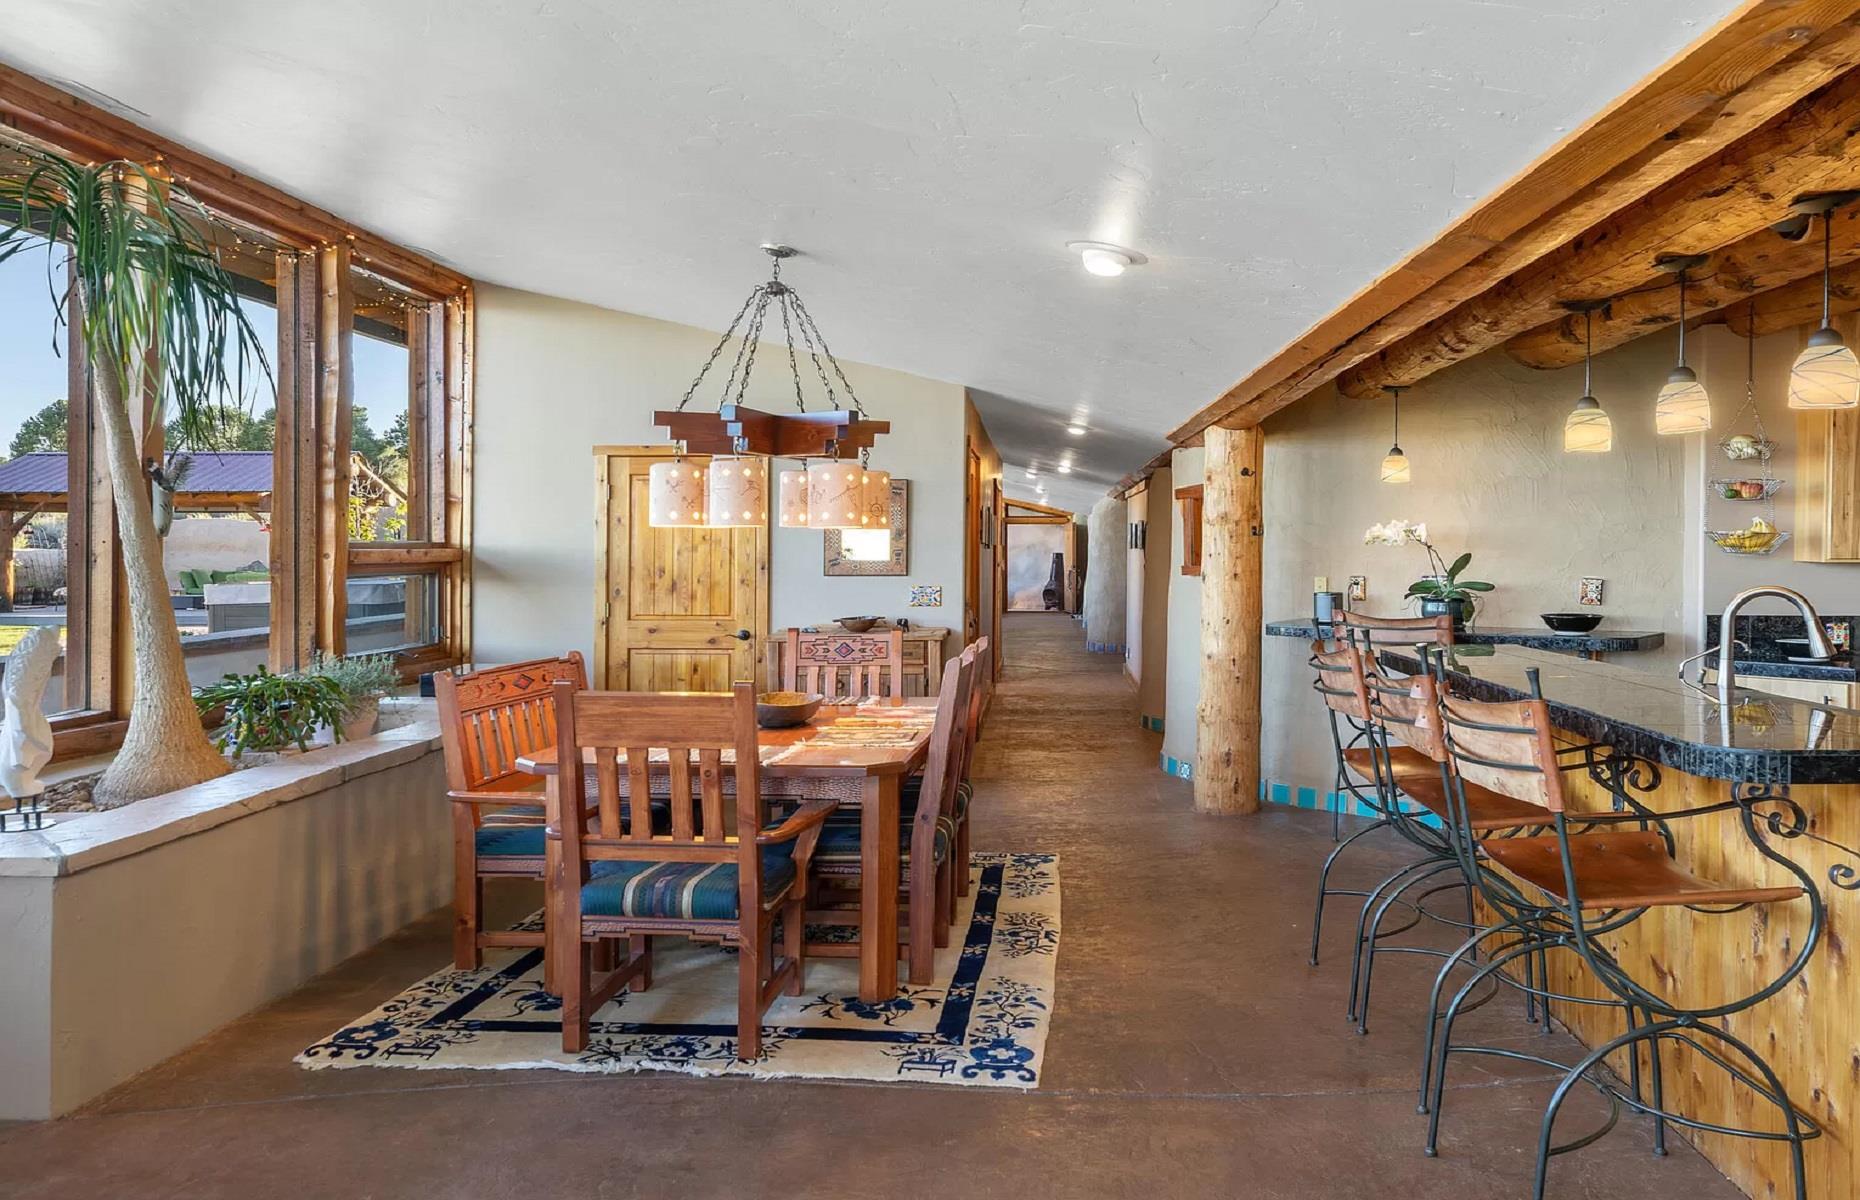 <p>We adore the home's rustic ceiling beams, oversized windows, sleek walls and floors, handmade kiva fireplaces, and quirky tiled details. Almost every window benefits from <a href="https://www.loveproperty.com/gallerylist/72934/homes-with-jaw-dropping-views">jaw-dropping views</a> of the Grand Mesa to the north, sweeping across the Cimarron Ridge all the way to the Sneffels Range in the south. Just picture pulling up a chair at the dining table and enjoying your morning eggs with this specular landscape right outside.</p>